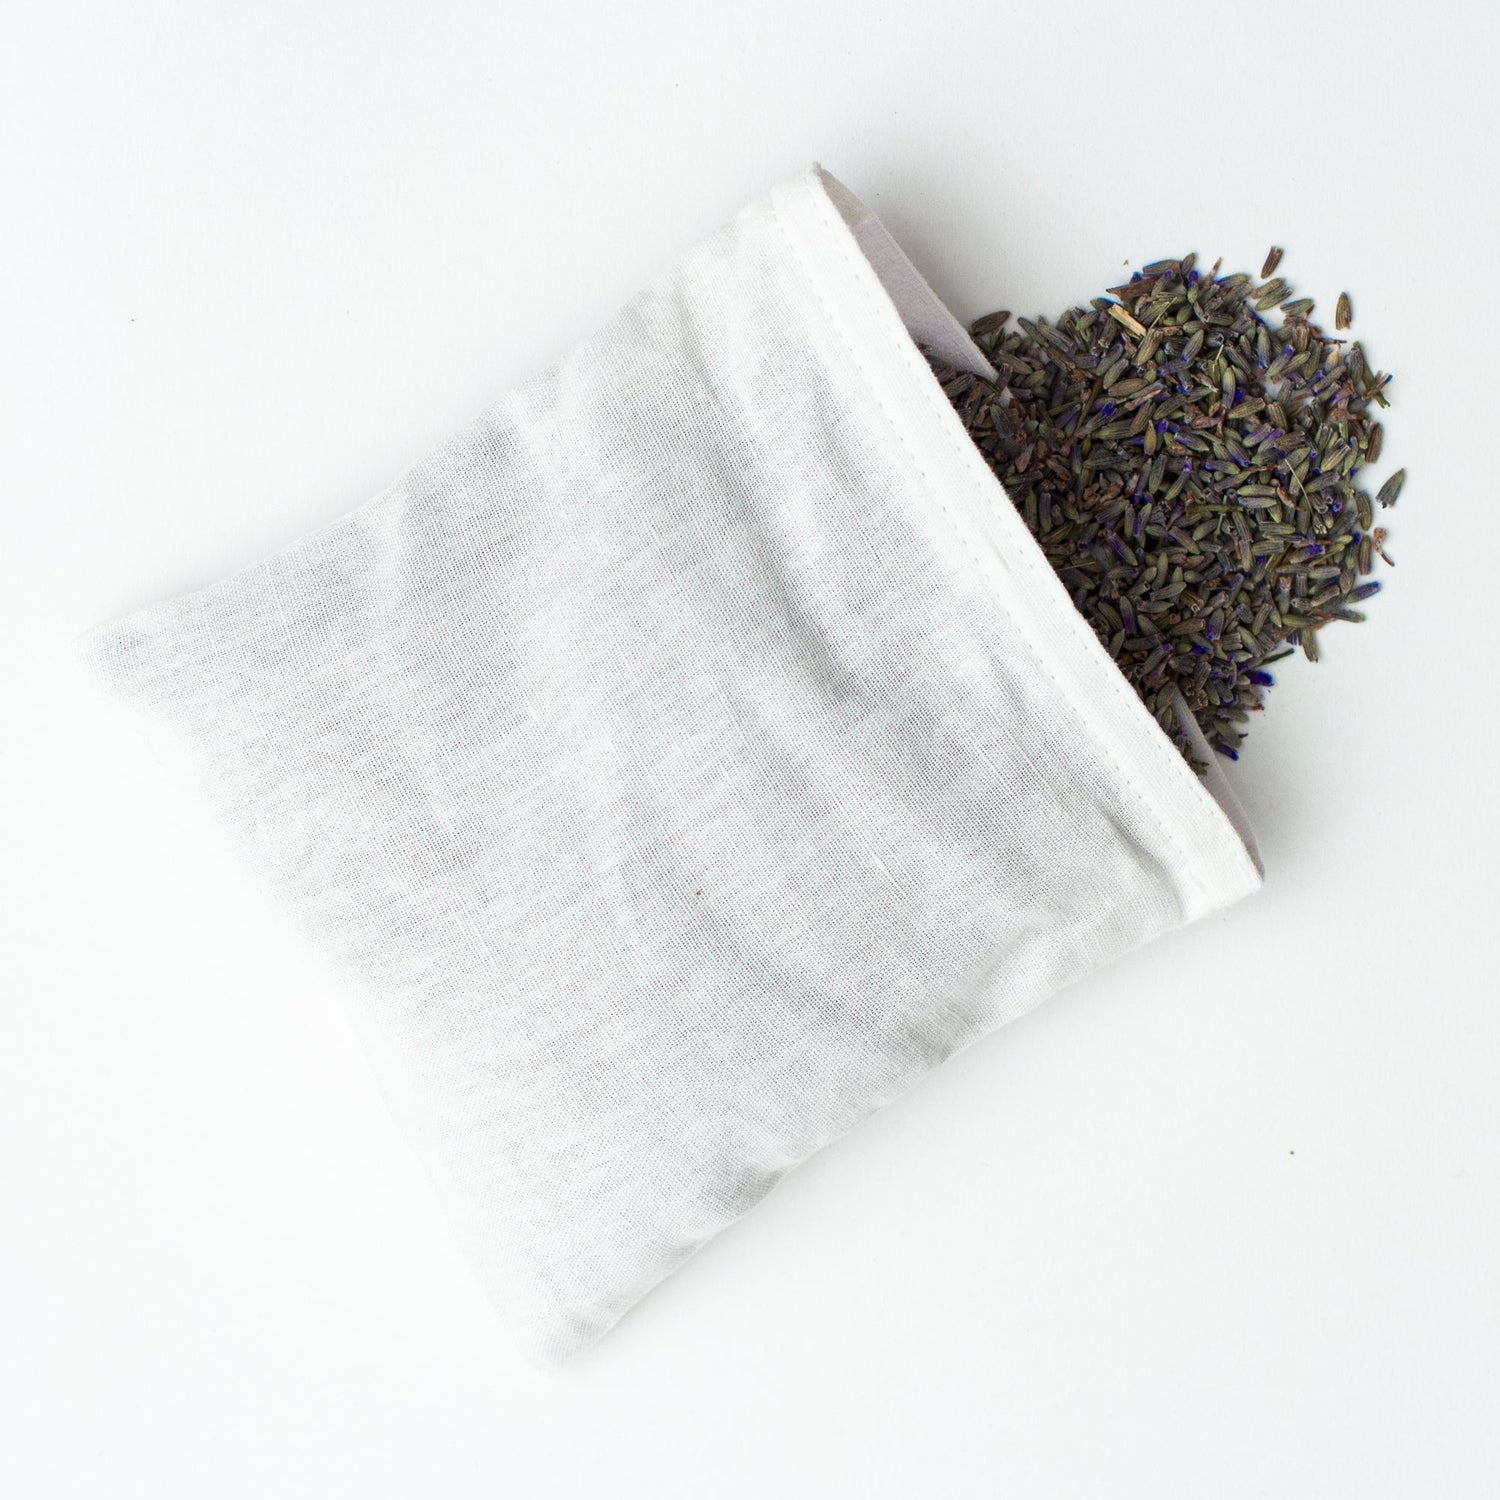 A white linen pouch with lavender spilling out of the open side